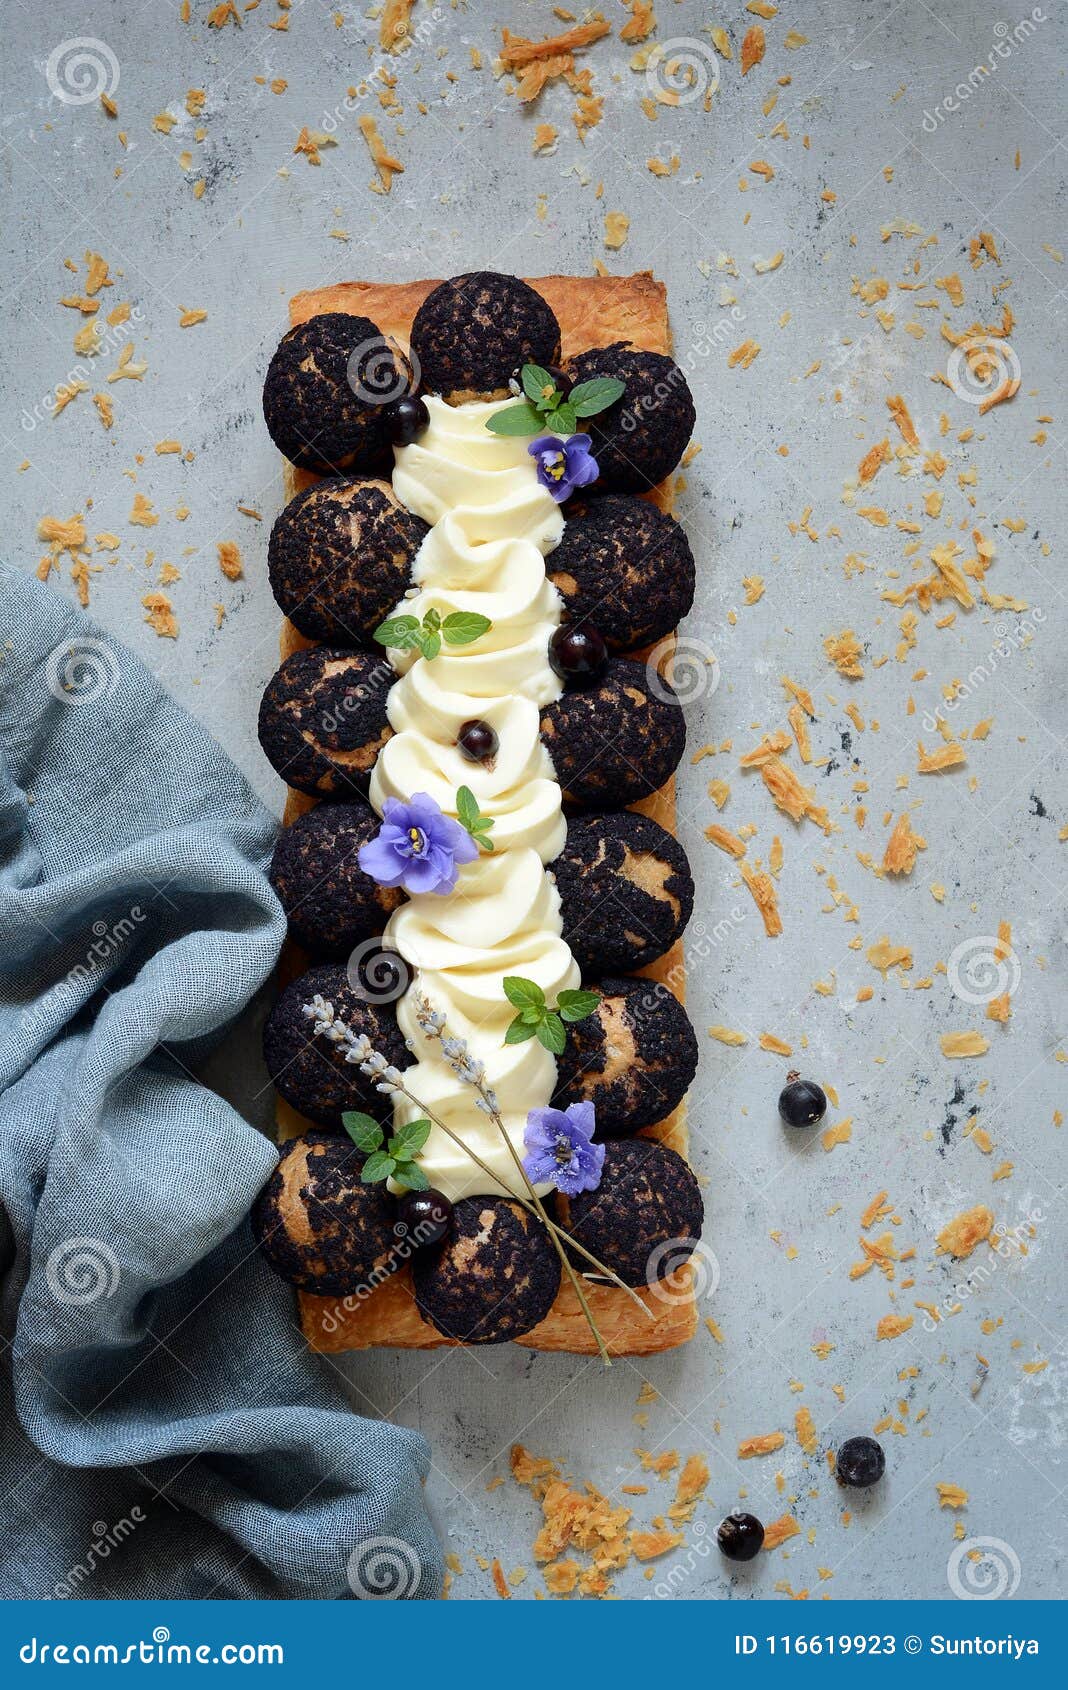 cake of saint-onore from puff pastry, profiteroles, currant cream and whipped cream. classic french dessert. an exquisite confecti